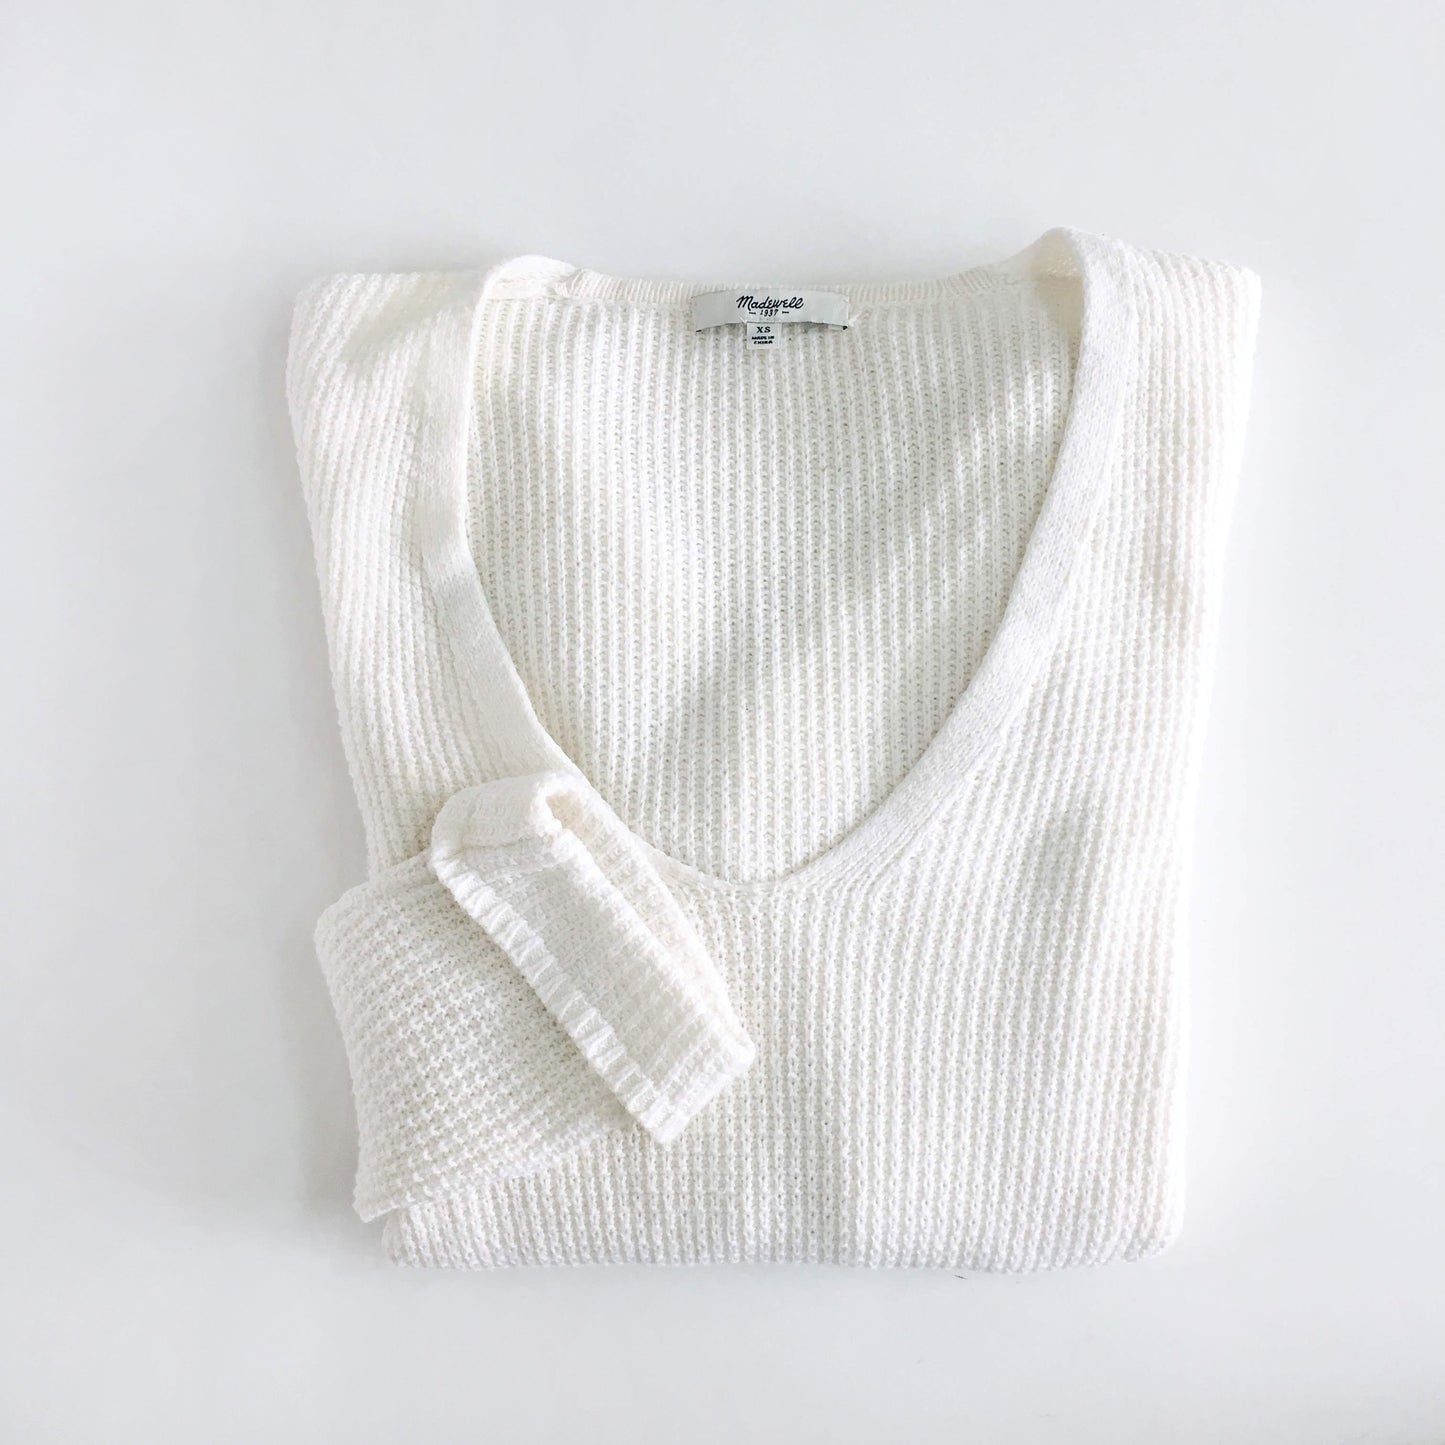 Madewell Oceanside Sweater - size xs